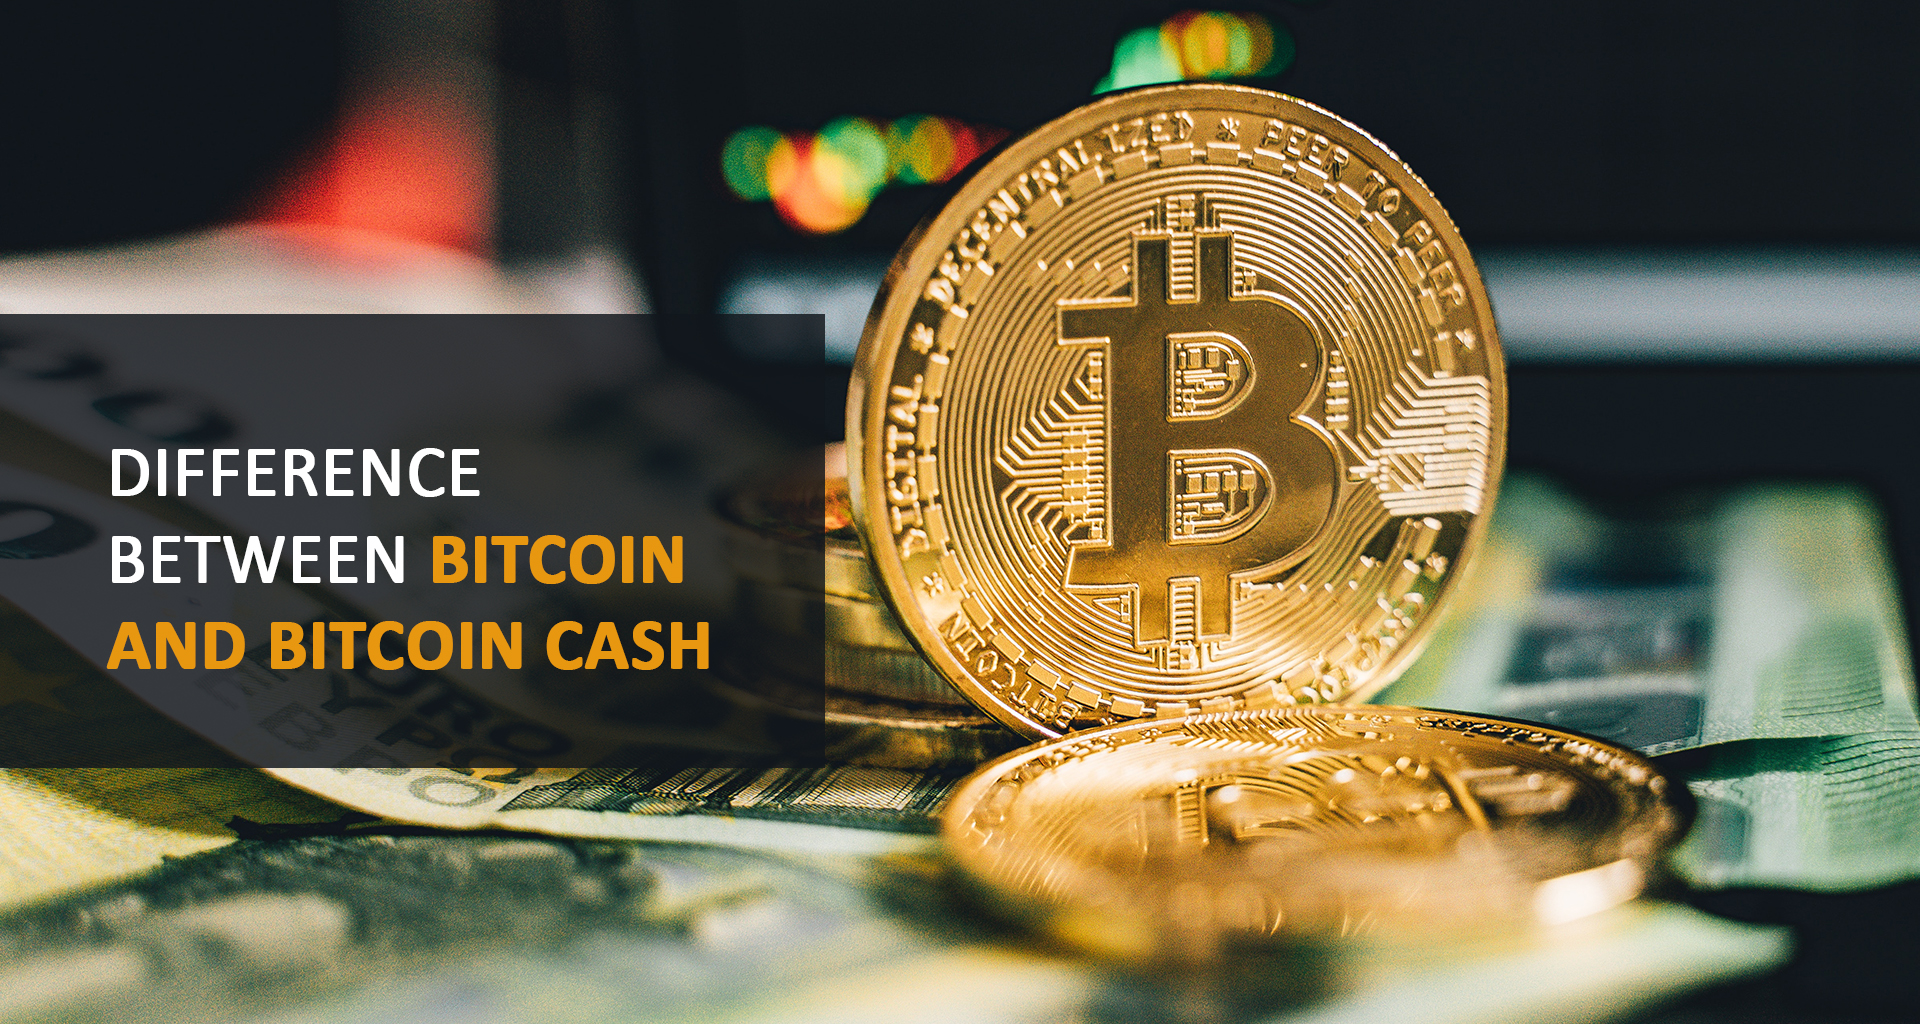 Difference between Bitcoin and Bitcoin cash